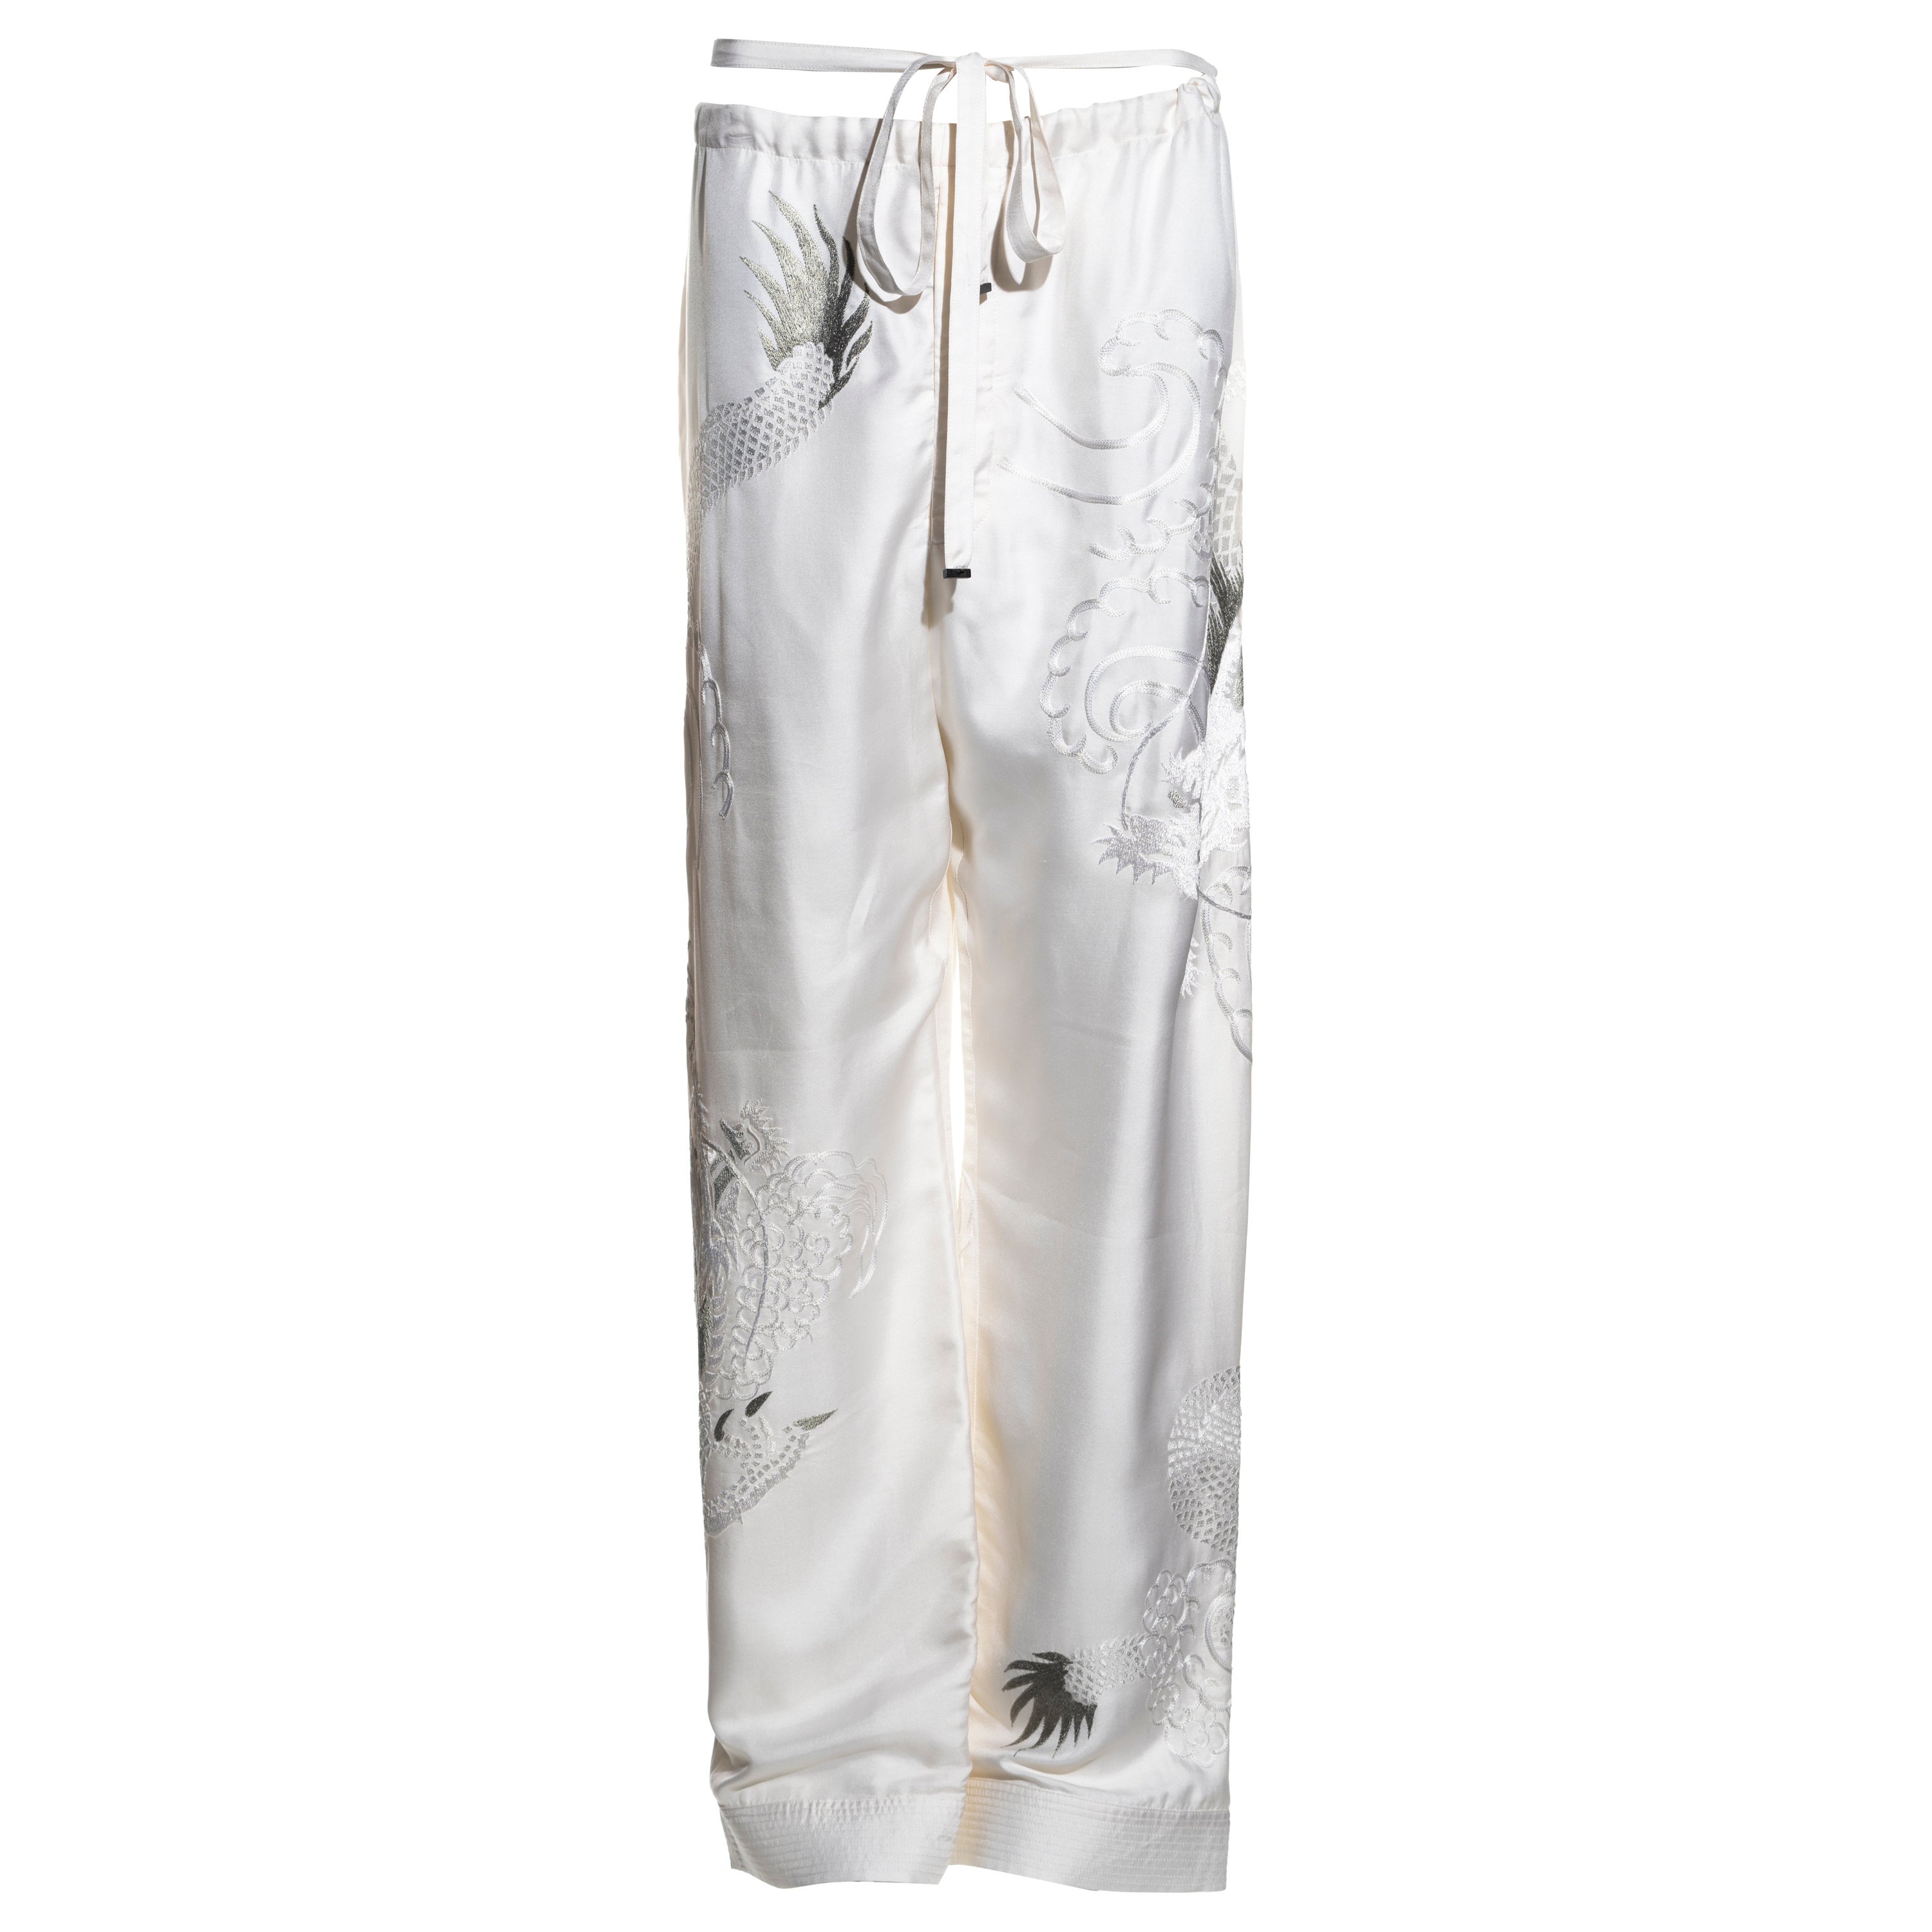 Gucci by Tom Ford white silk drawstring pants with embroidery, ss 2001